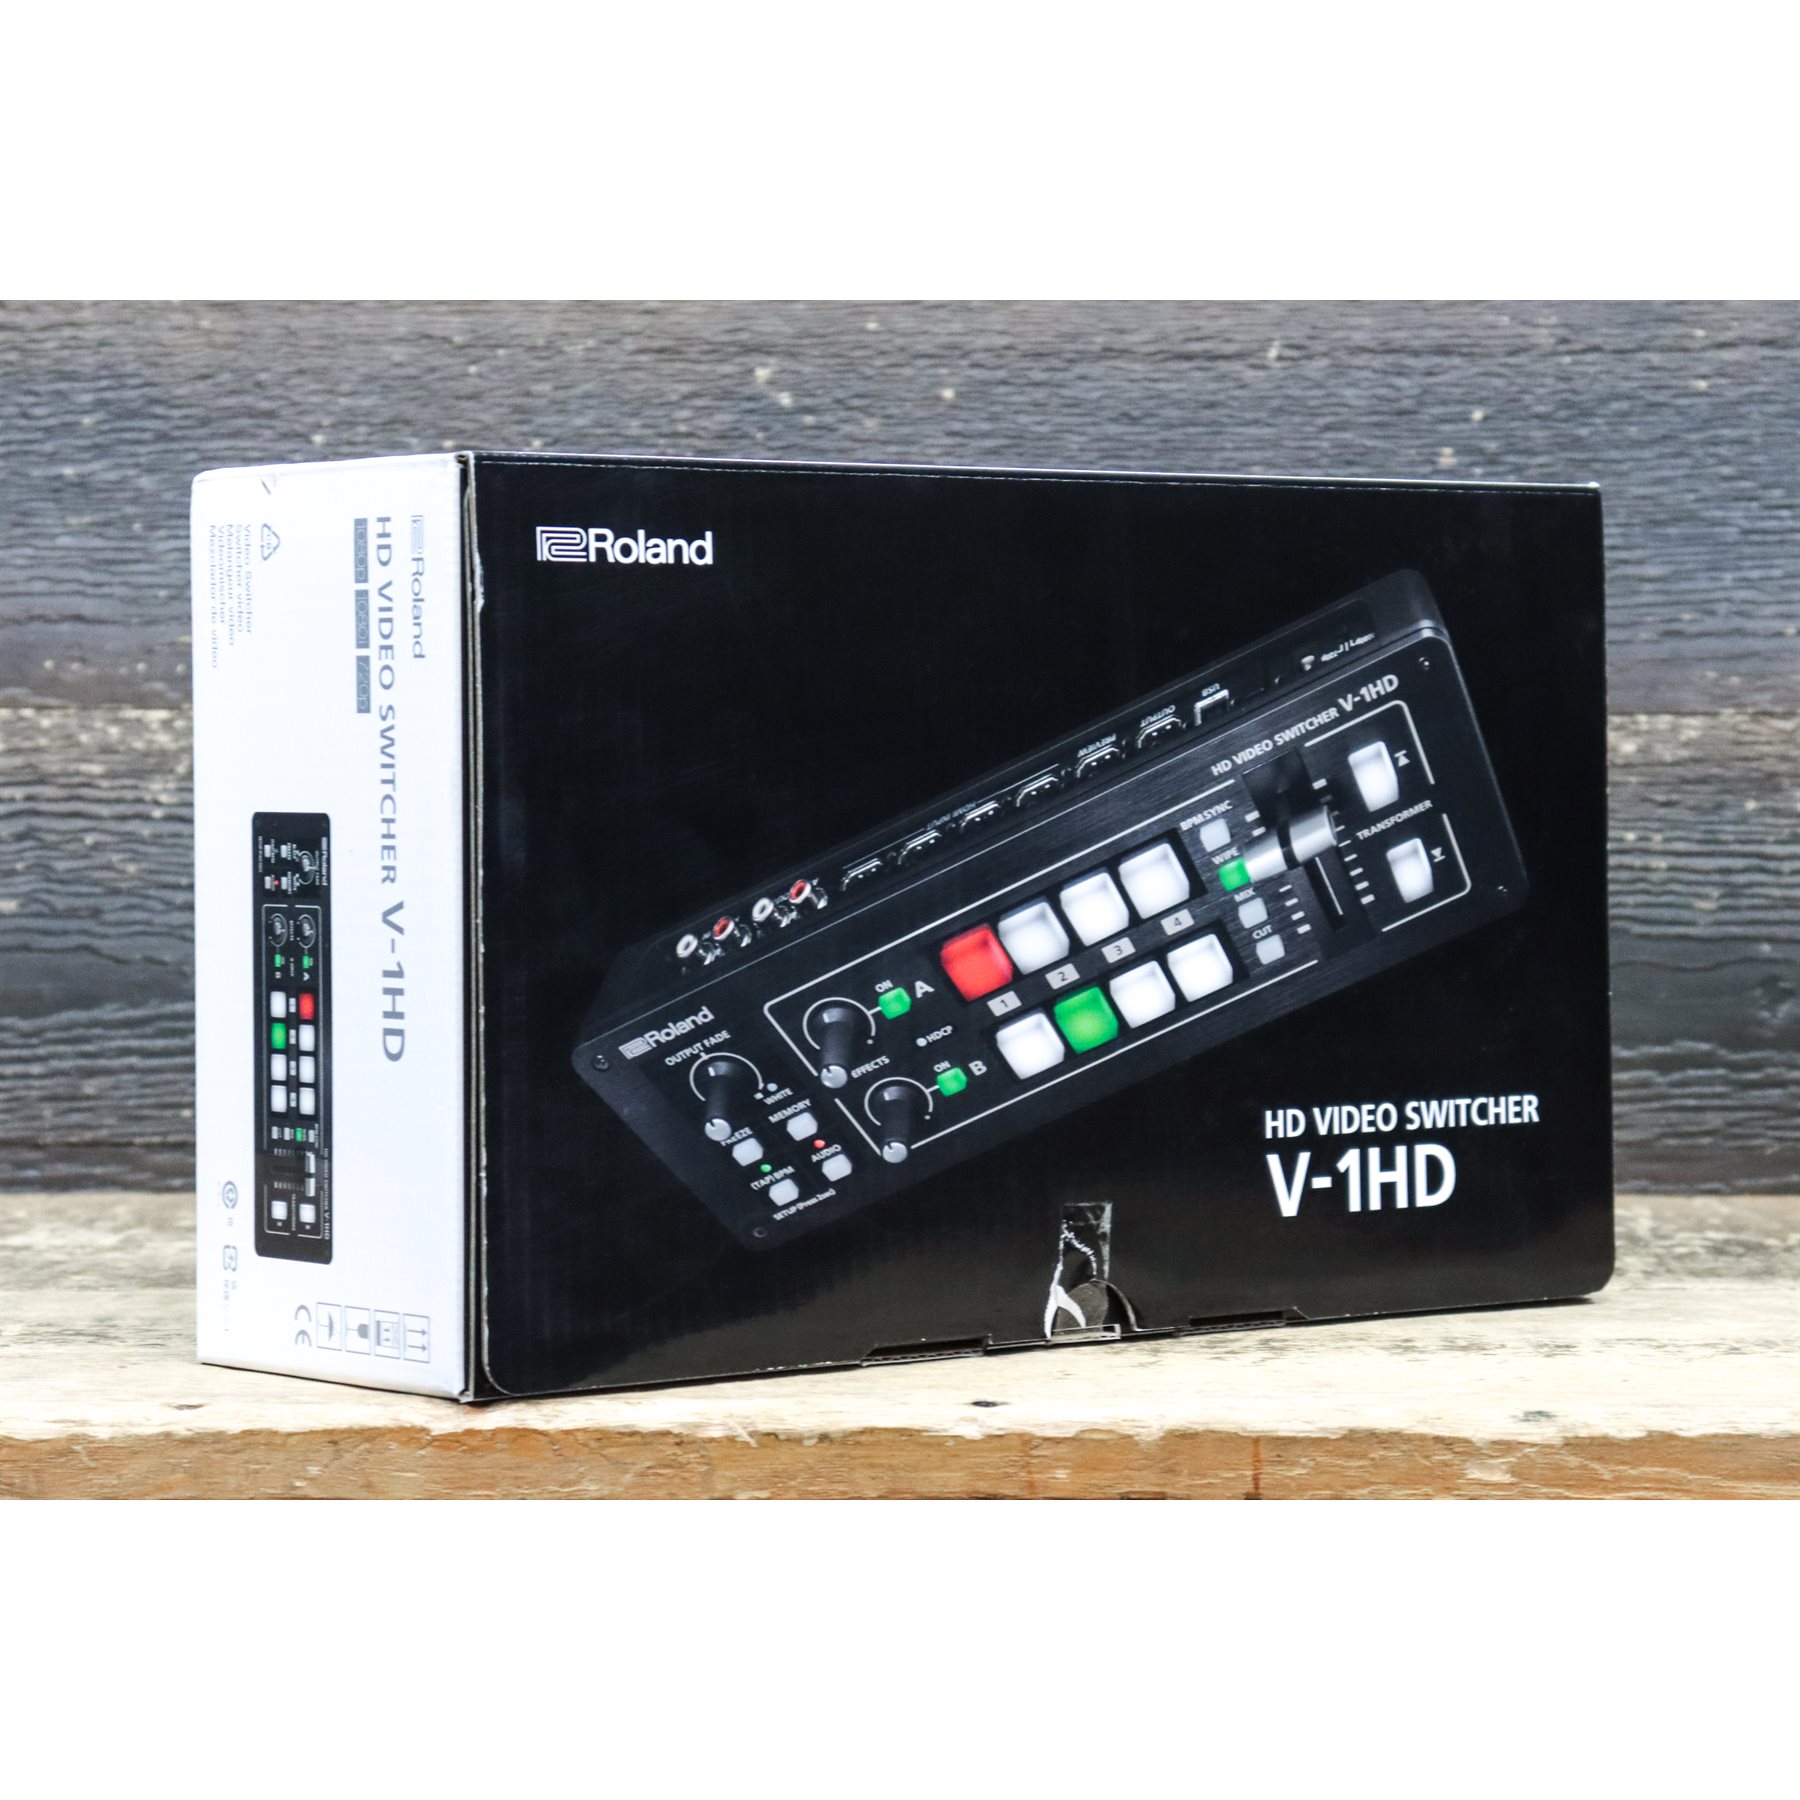 ROLAND V-1HD 4 HDMI INPUTS/2 OUTPUTS 12 CHANNEL AUDIO MIXER VIDEO